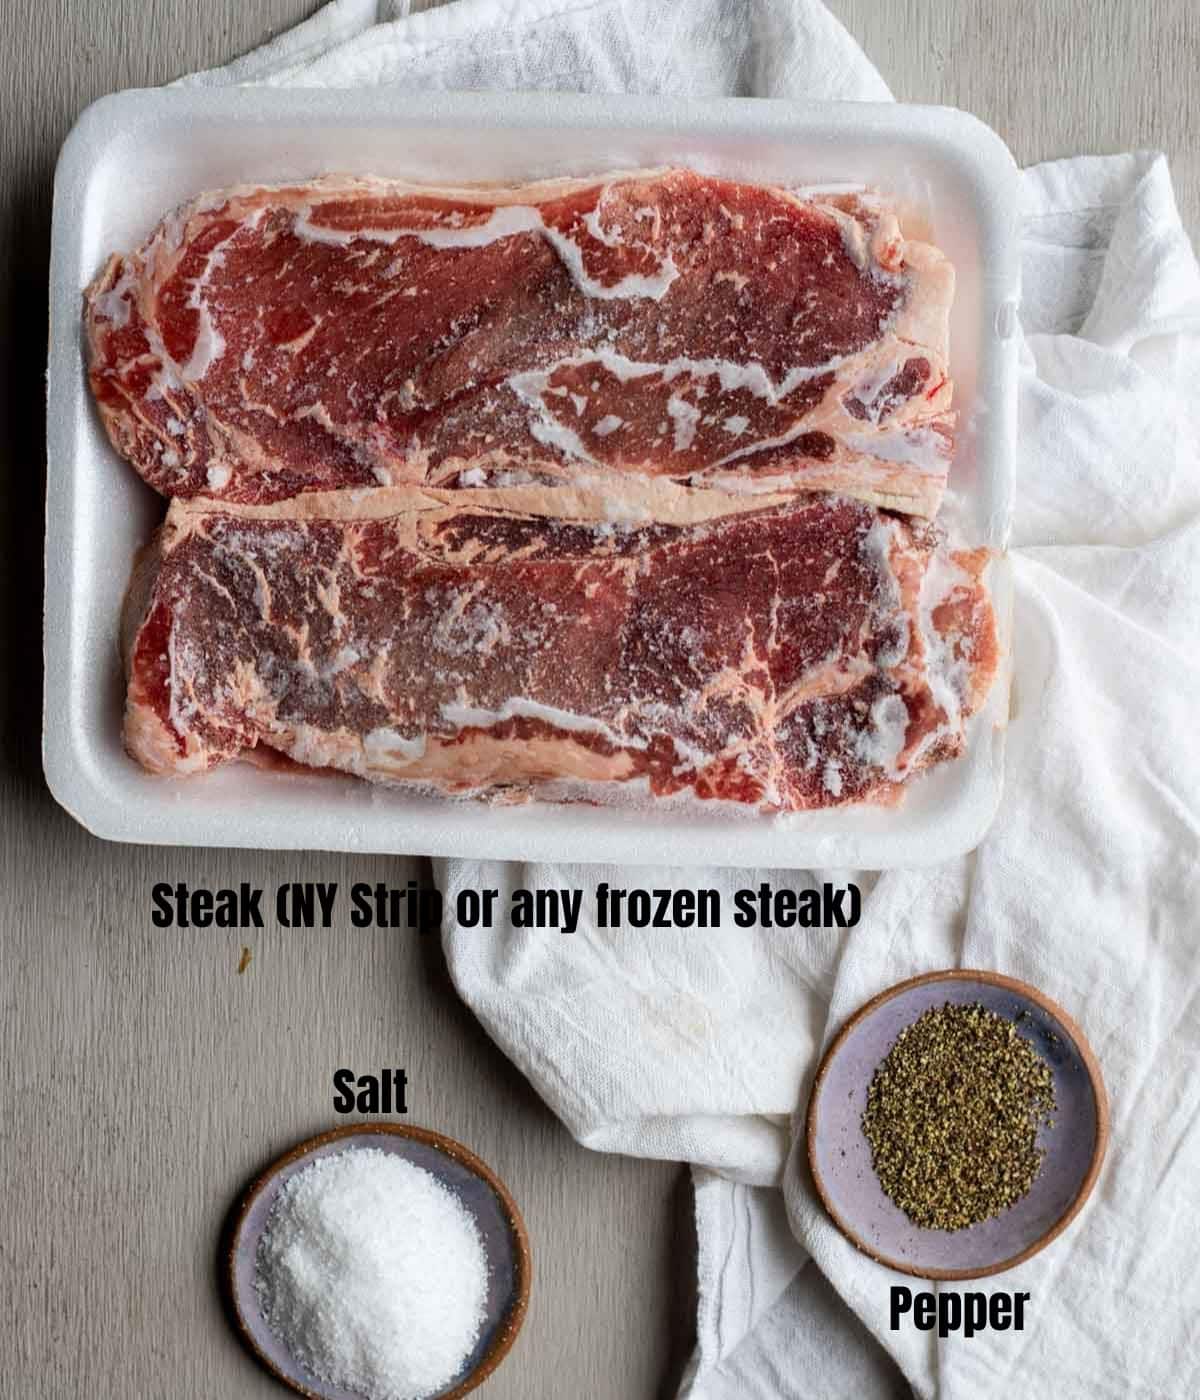 https://www.wenthere8this.com/wp-content/uploads/2022/09/Ingredients-for-sous-vide-frozen-steak.jpg